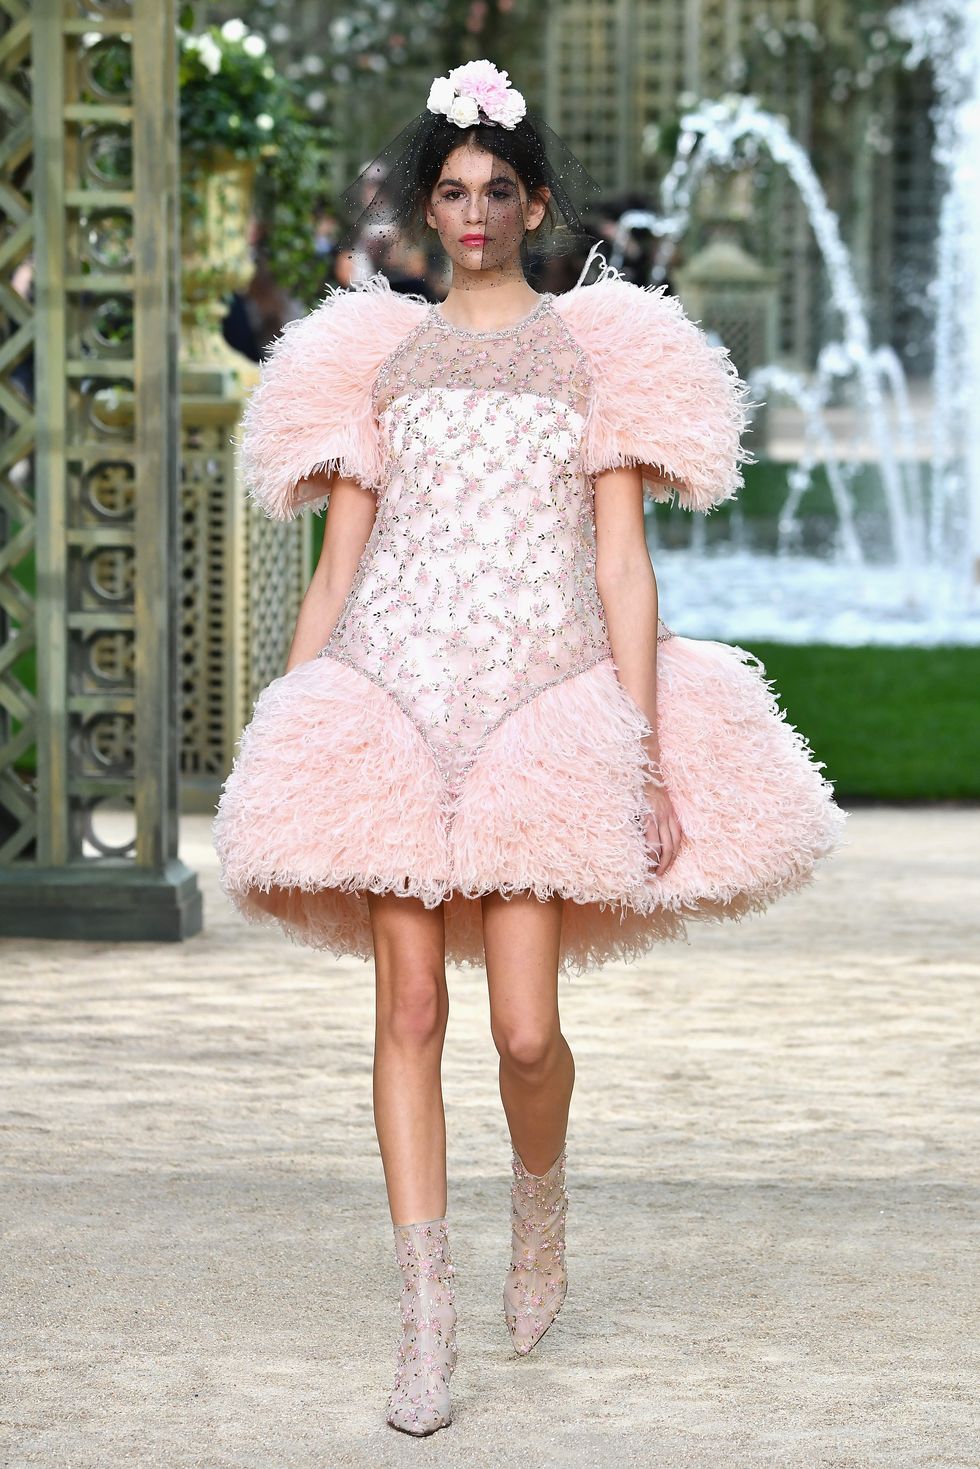 Kaia Gerber Makes Couture Debut At Chanel In Powder Pink